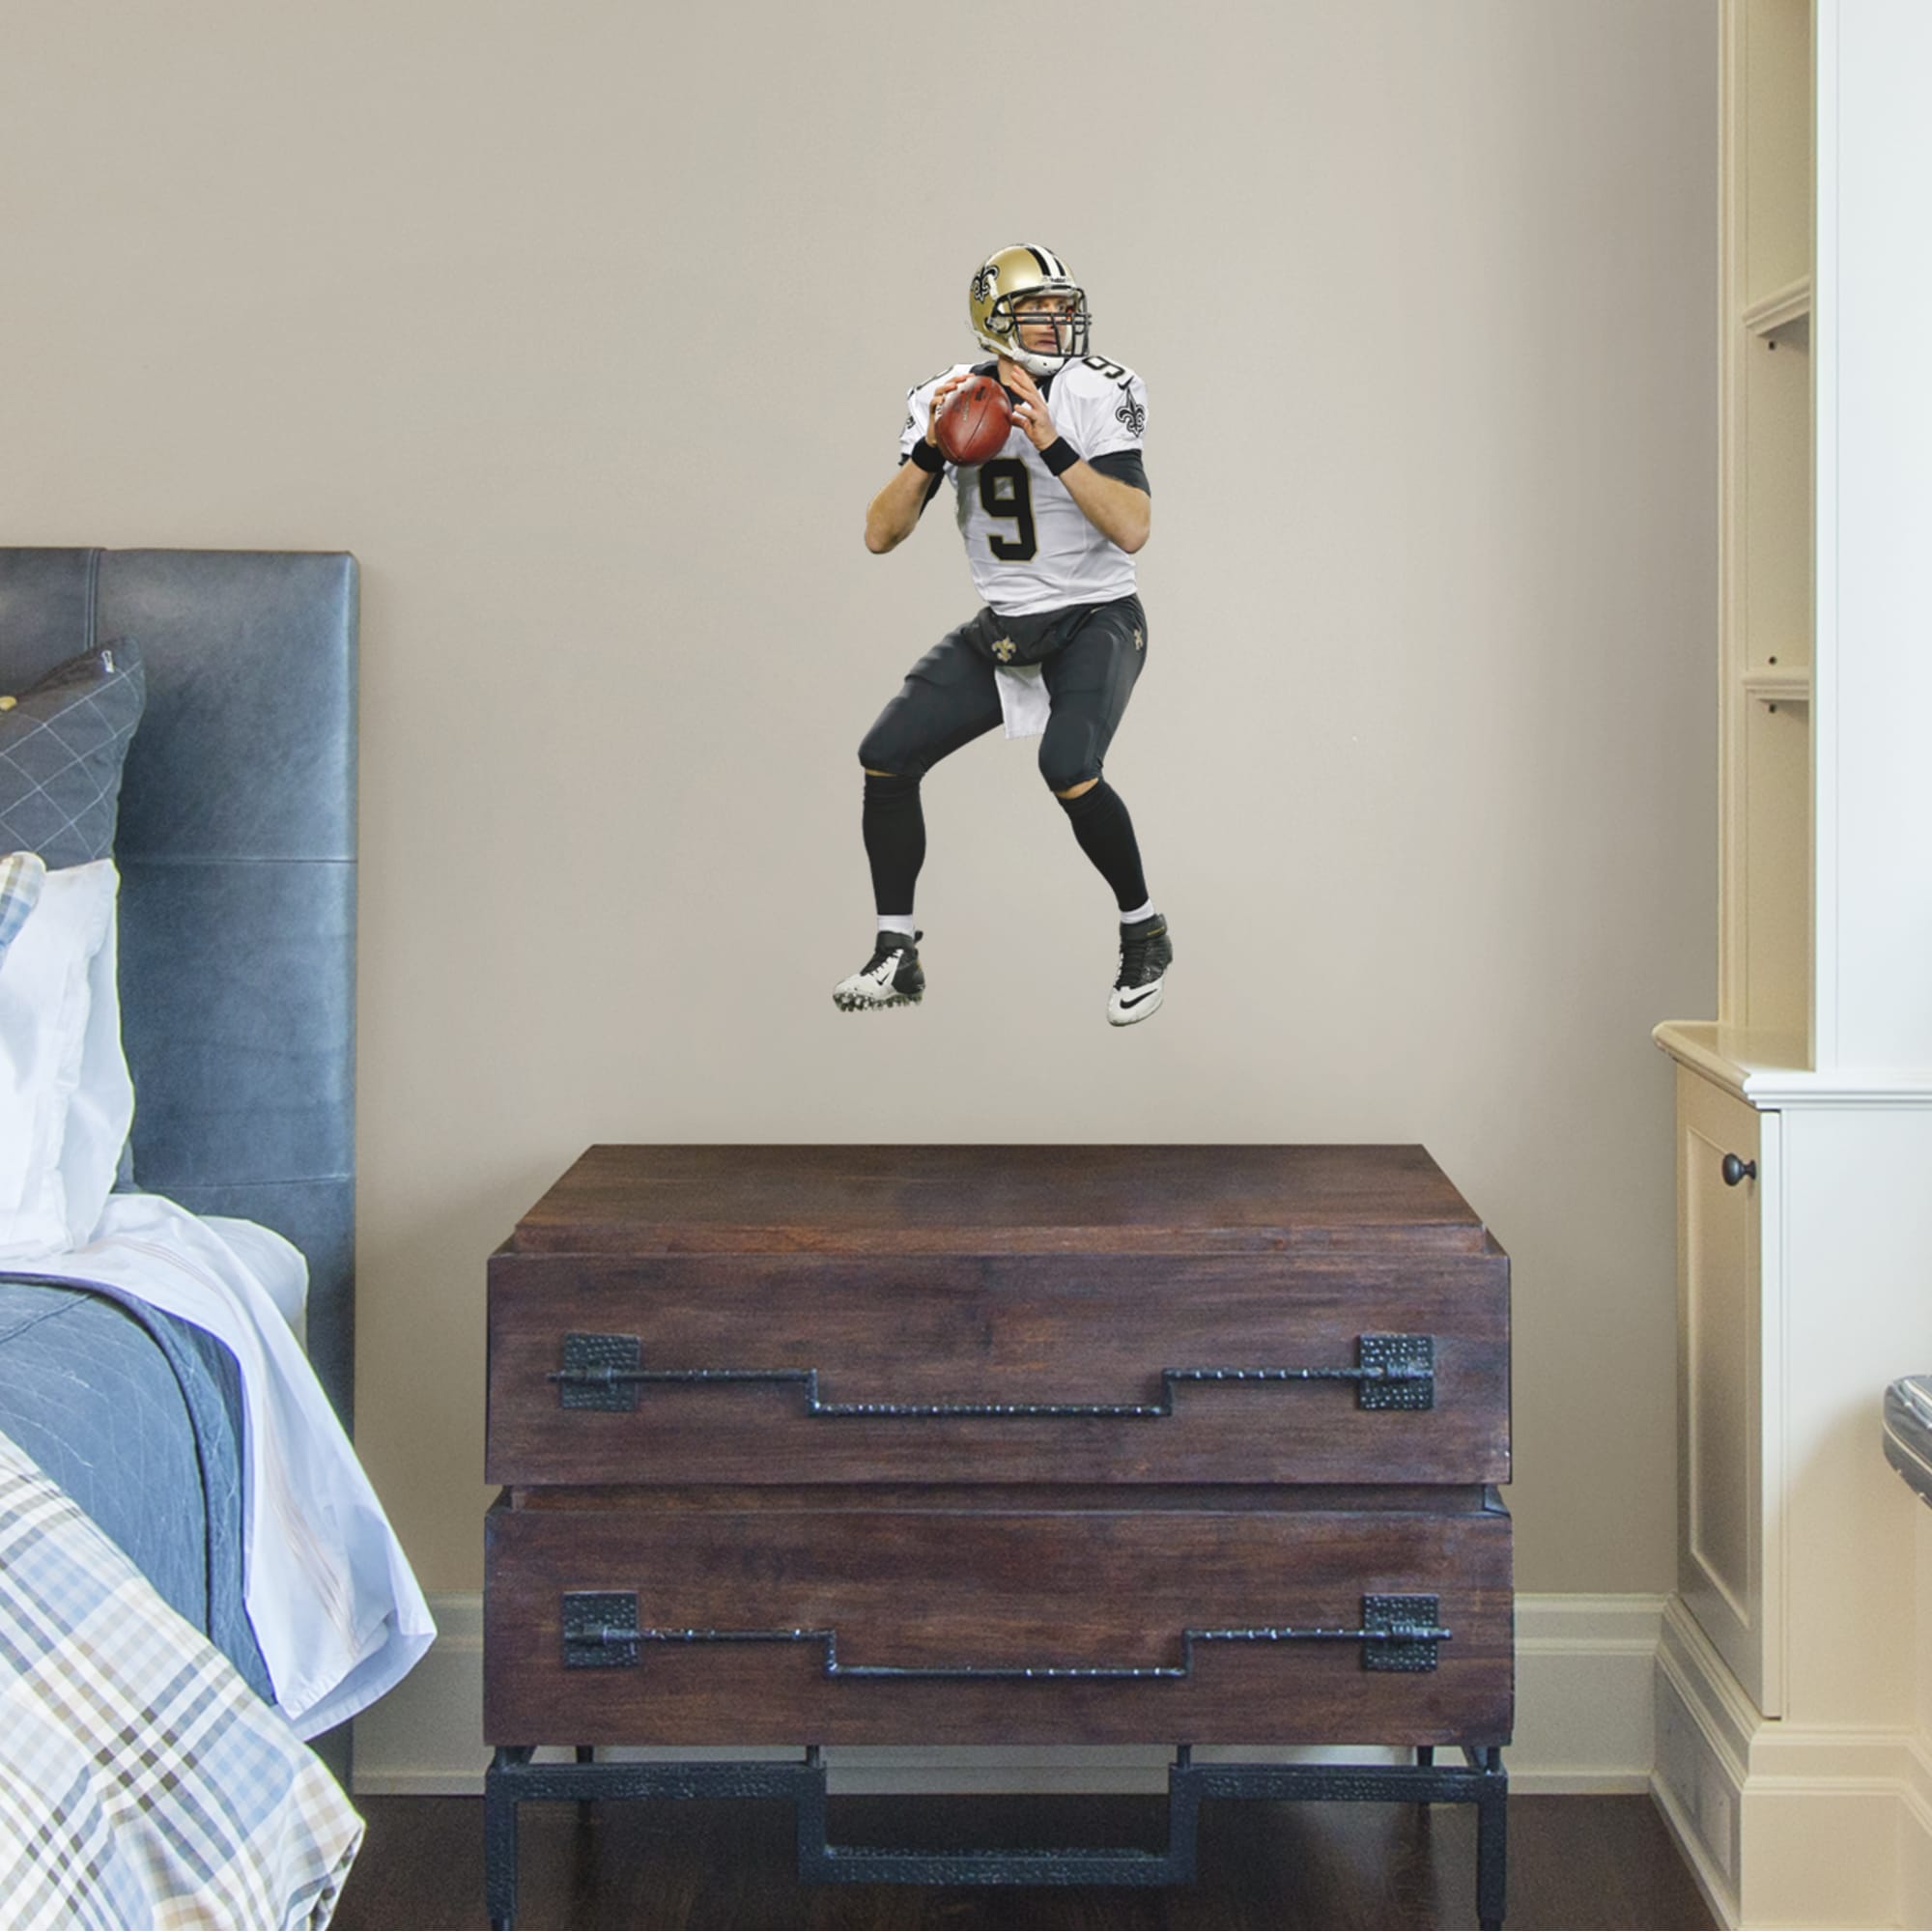 Drew Brees for New Orleans Saints - Officially Licensed NFL Removable Wall Decal 14.0"W x 32.0"H by Fathead | Vinyl